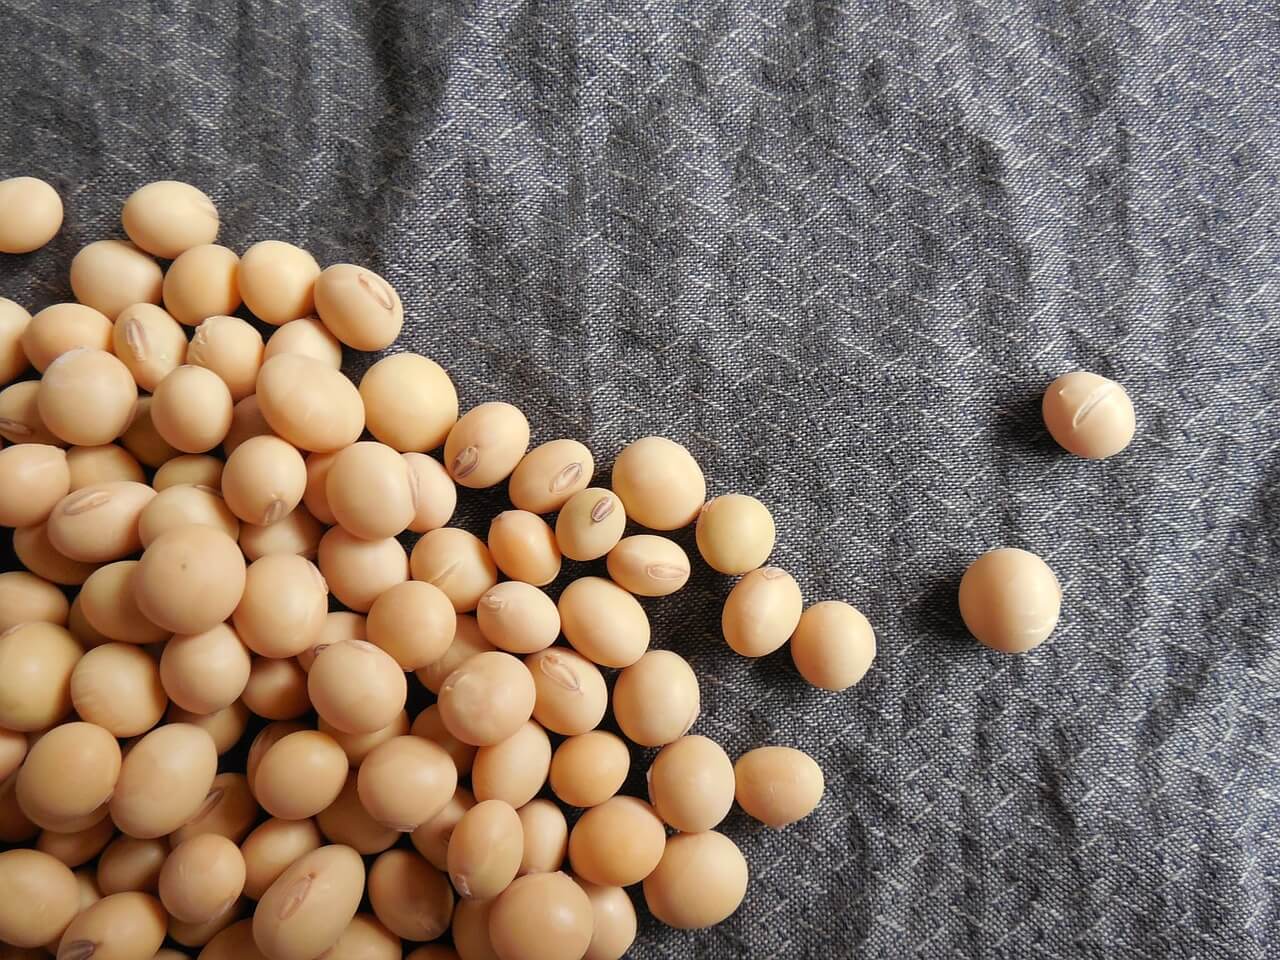 soybeans-182295_1280-2